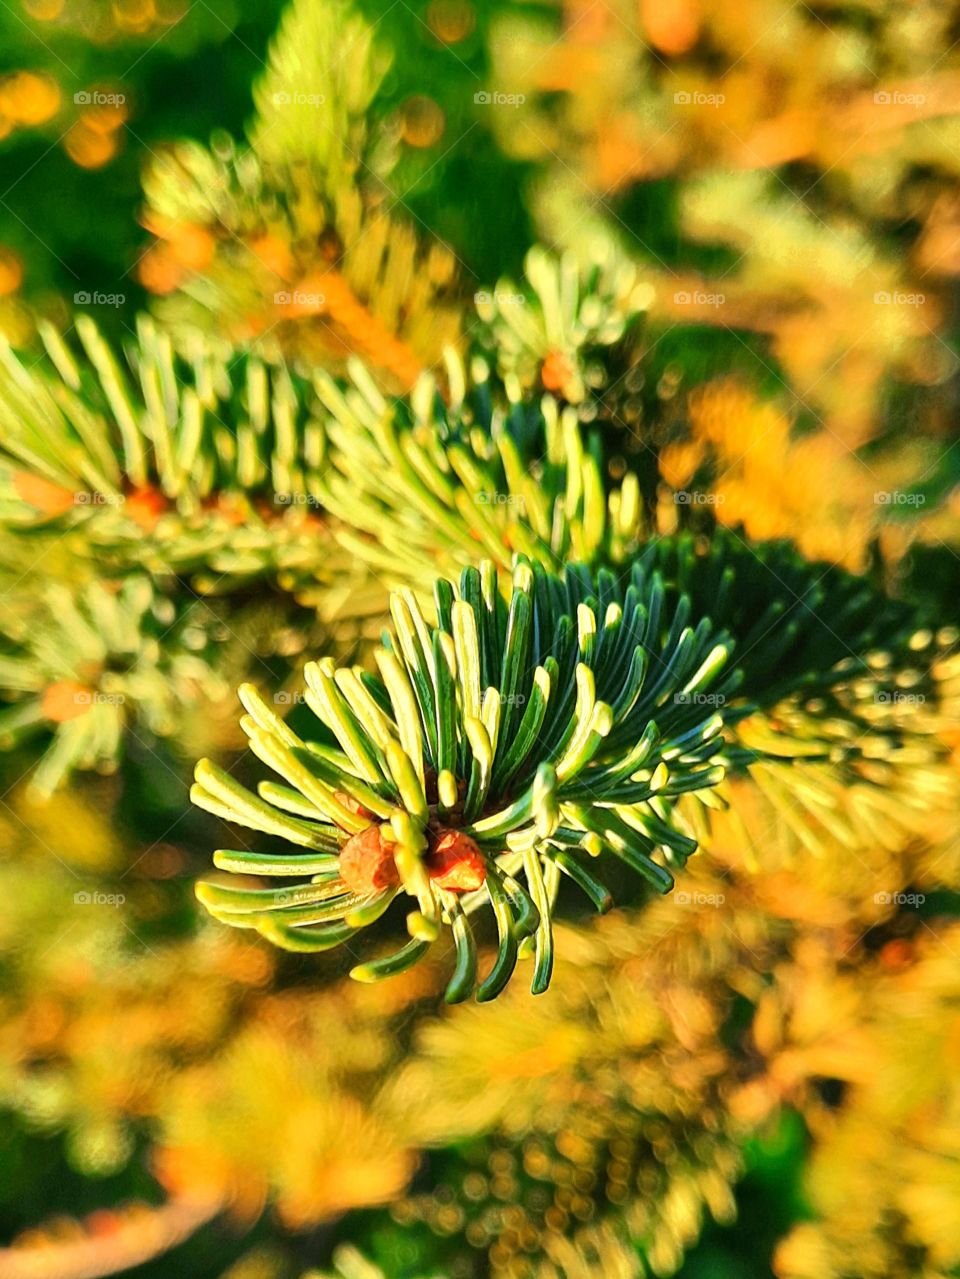 Golden hour, sunset, yellow light, picture of a pine tree branch in Erindale park near sunset time. It has very warm colours because of the sun and golden hour. It is a very pretty, and focused picture with a blurred background.